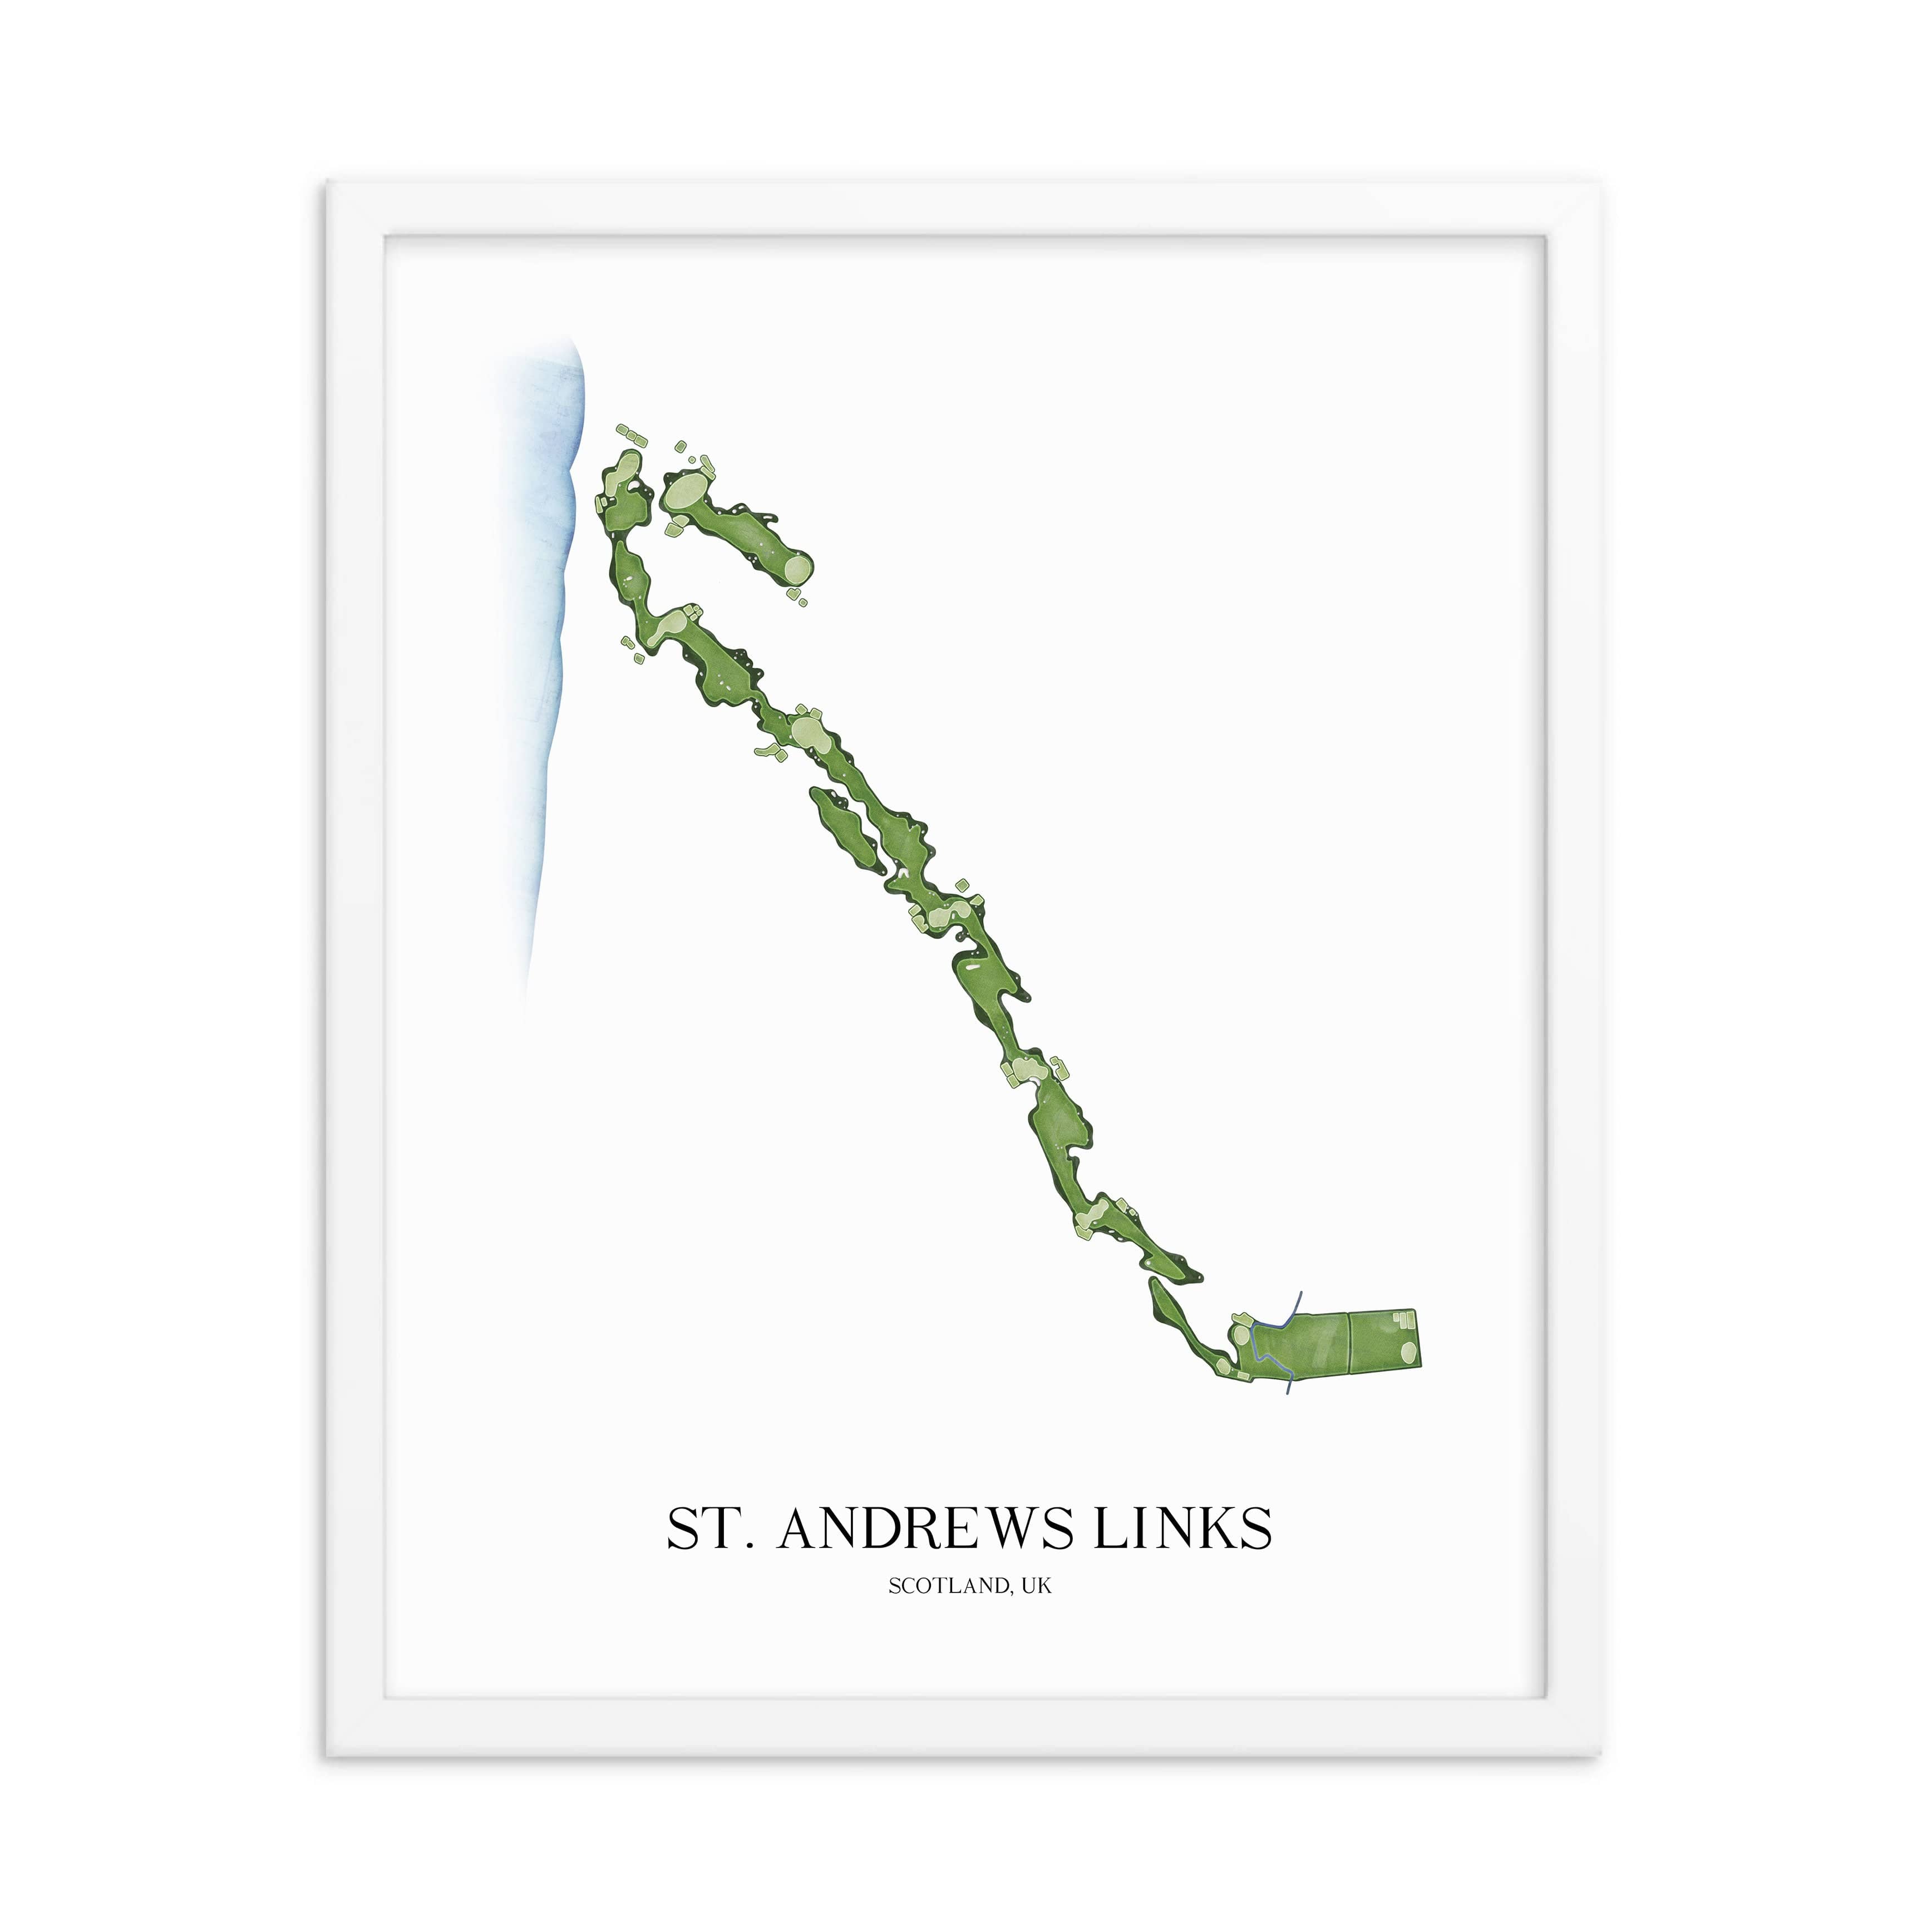 The 19th Hole Golf Shop - Golf Course Prints -  St. Andrews Links - The Old Course Golf Course Map